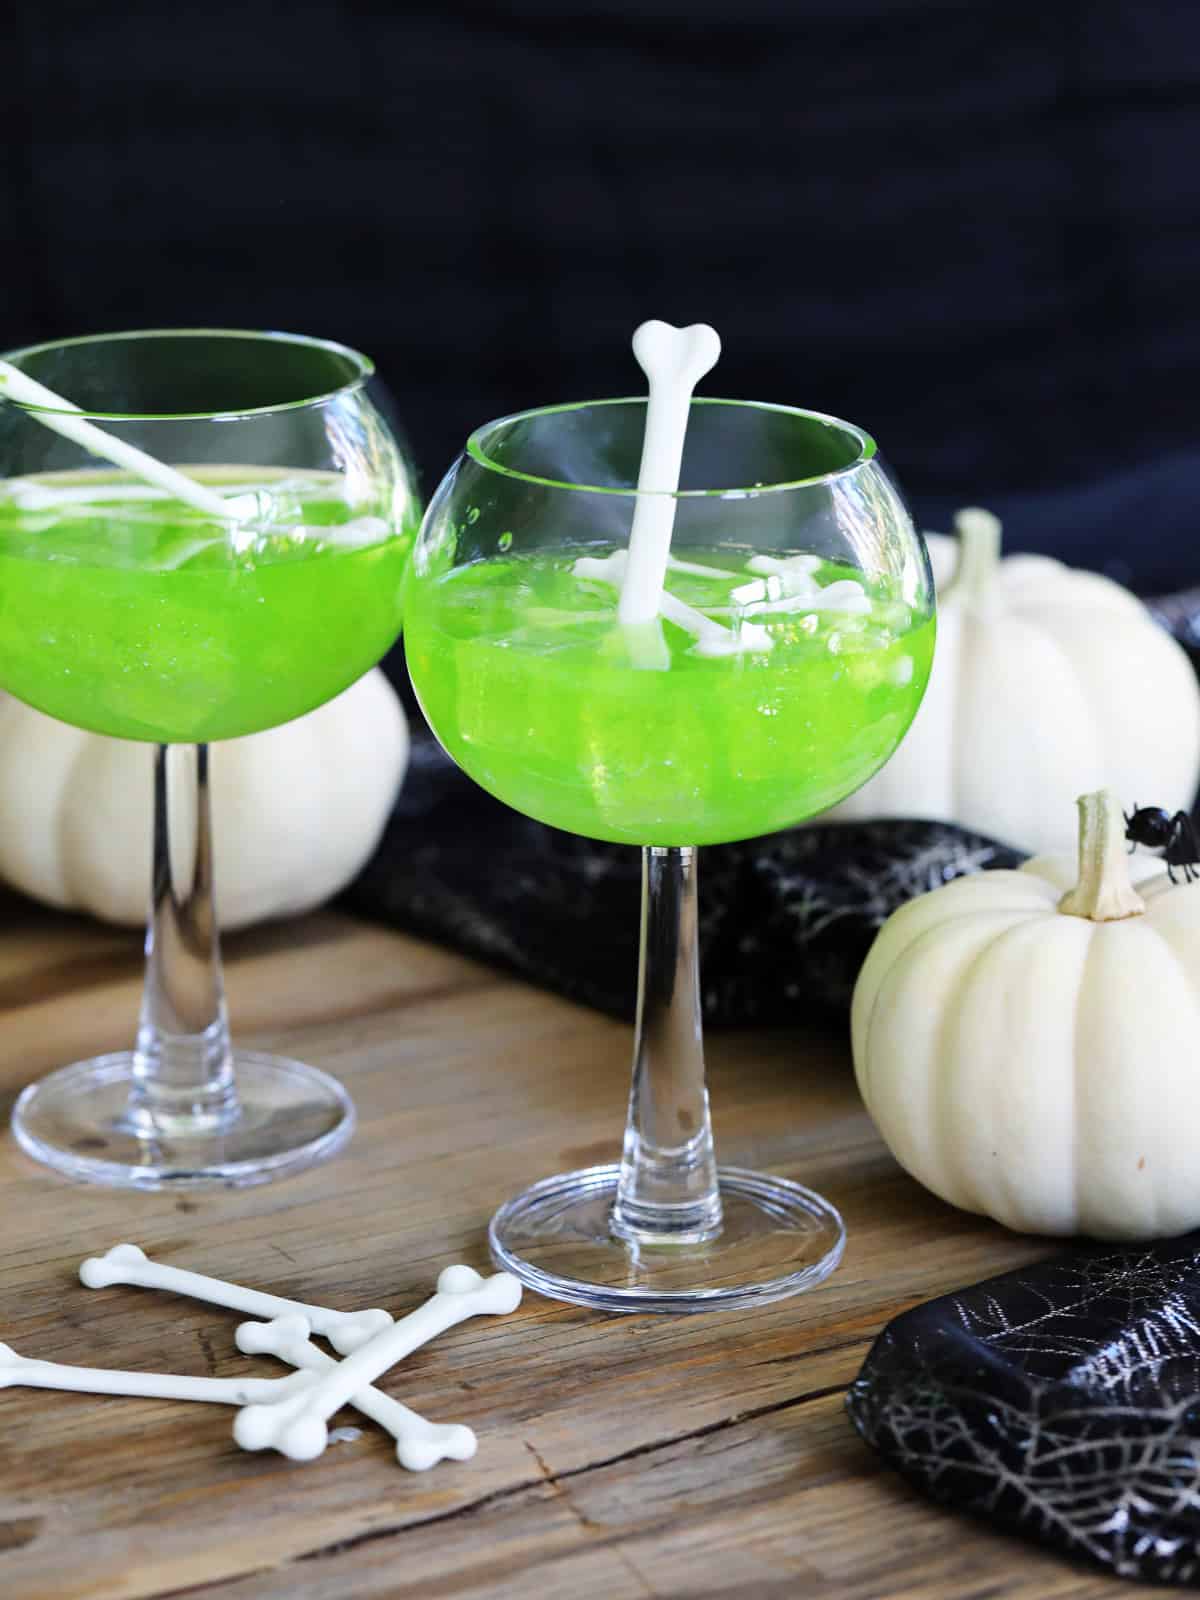 A Halloween party with two green MIdori sour vodka cocktails and garnished with white plastic bones for Halloween cocktails.